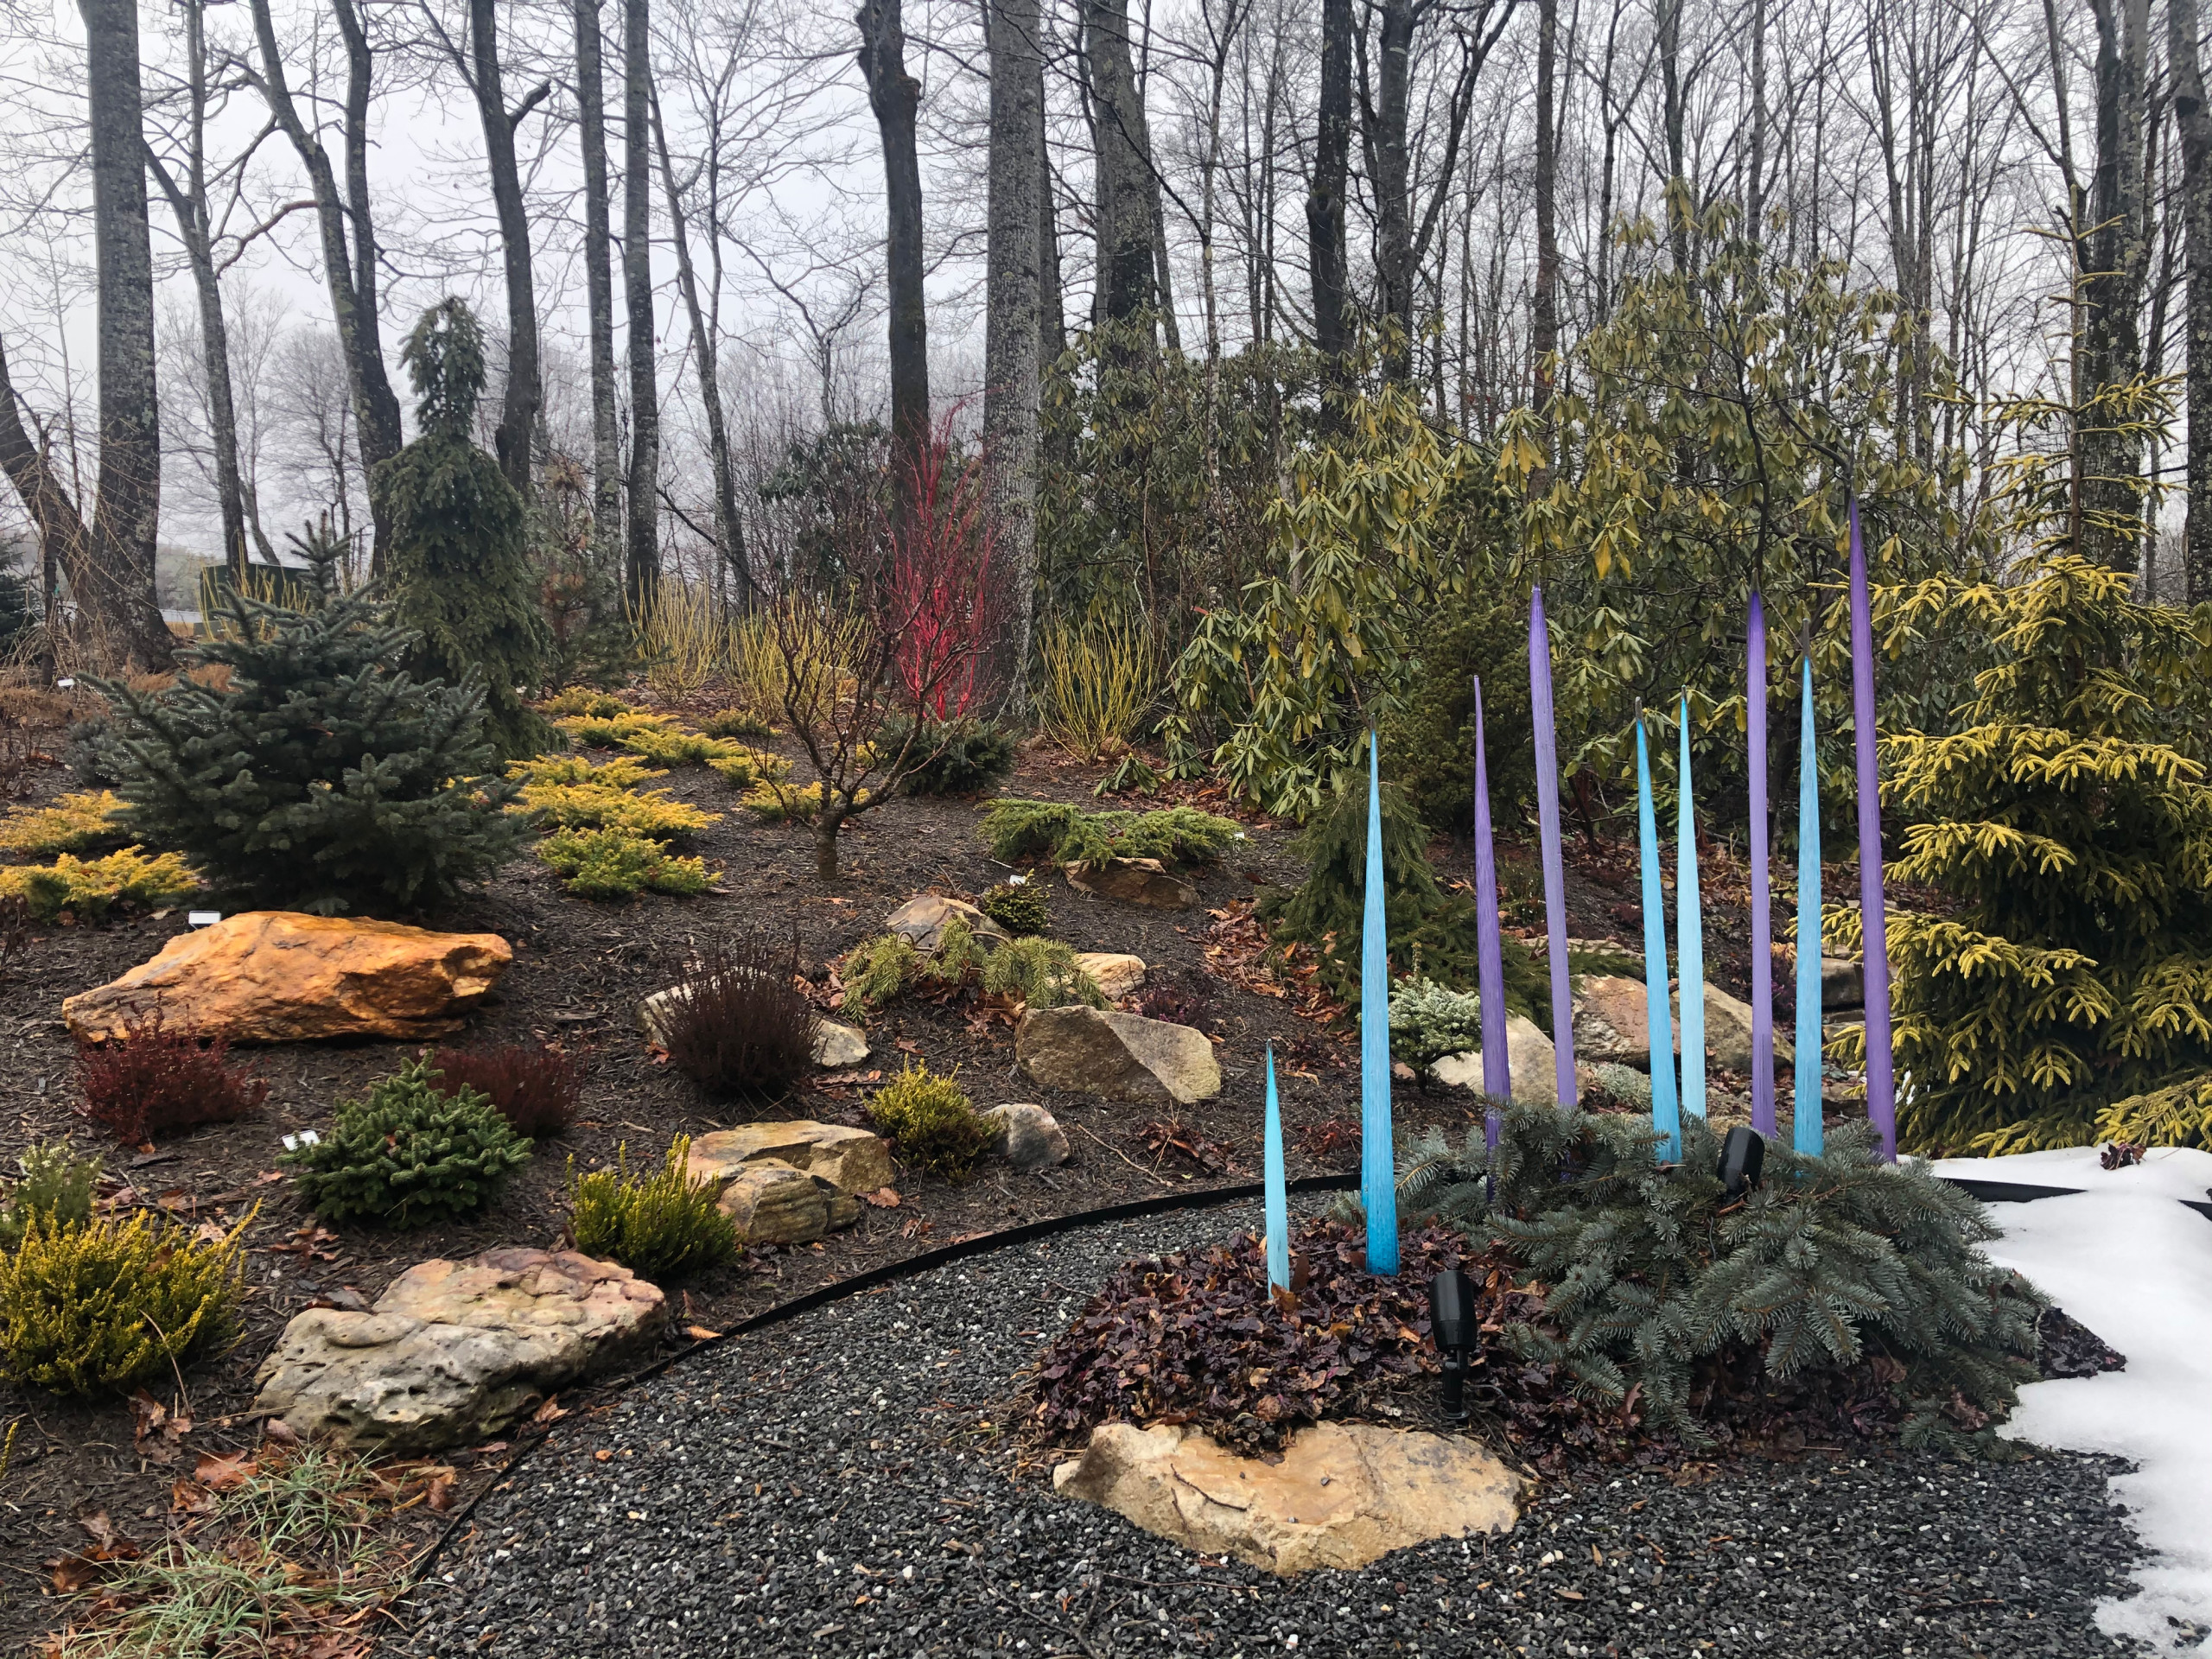 Cheerful garden on a dreary winter day